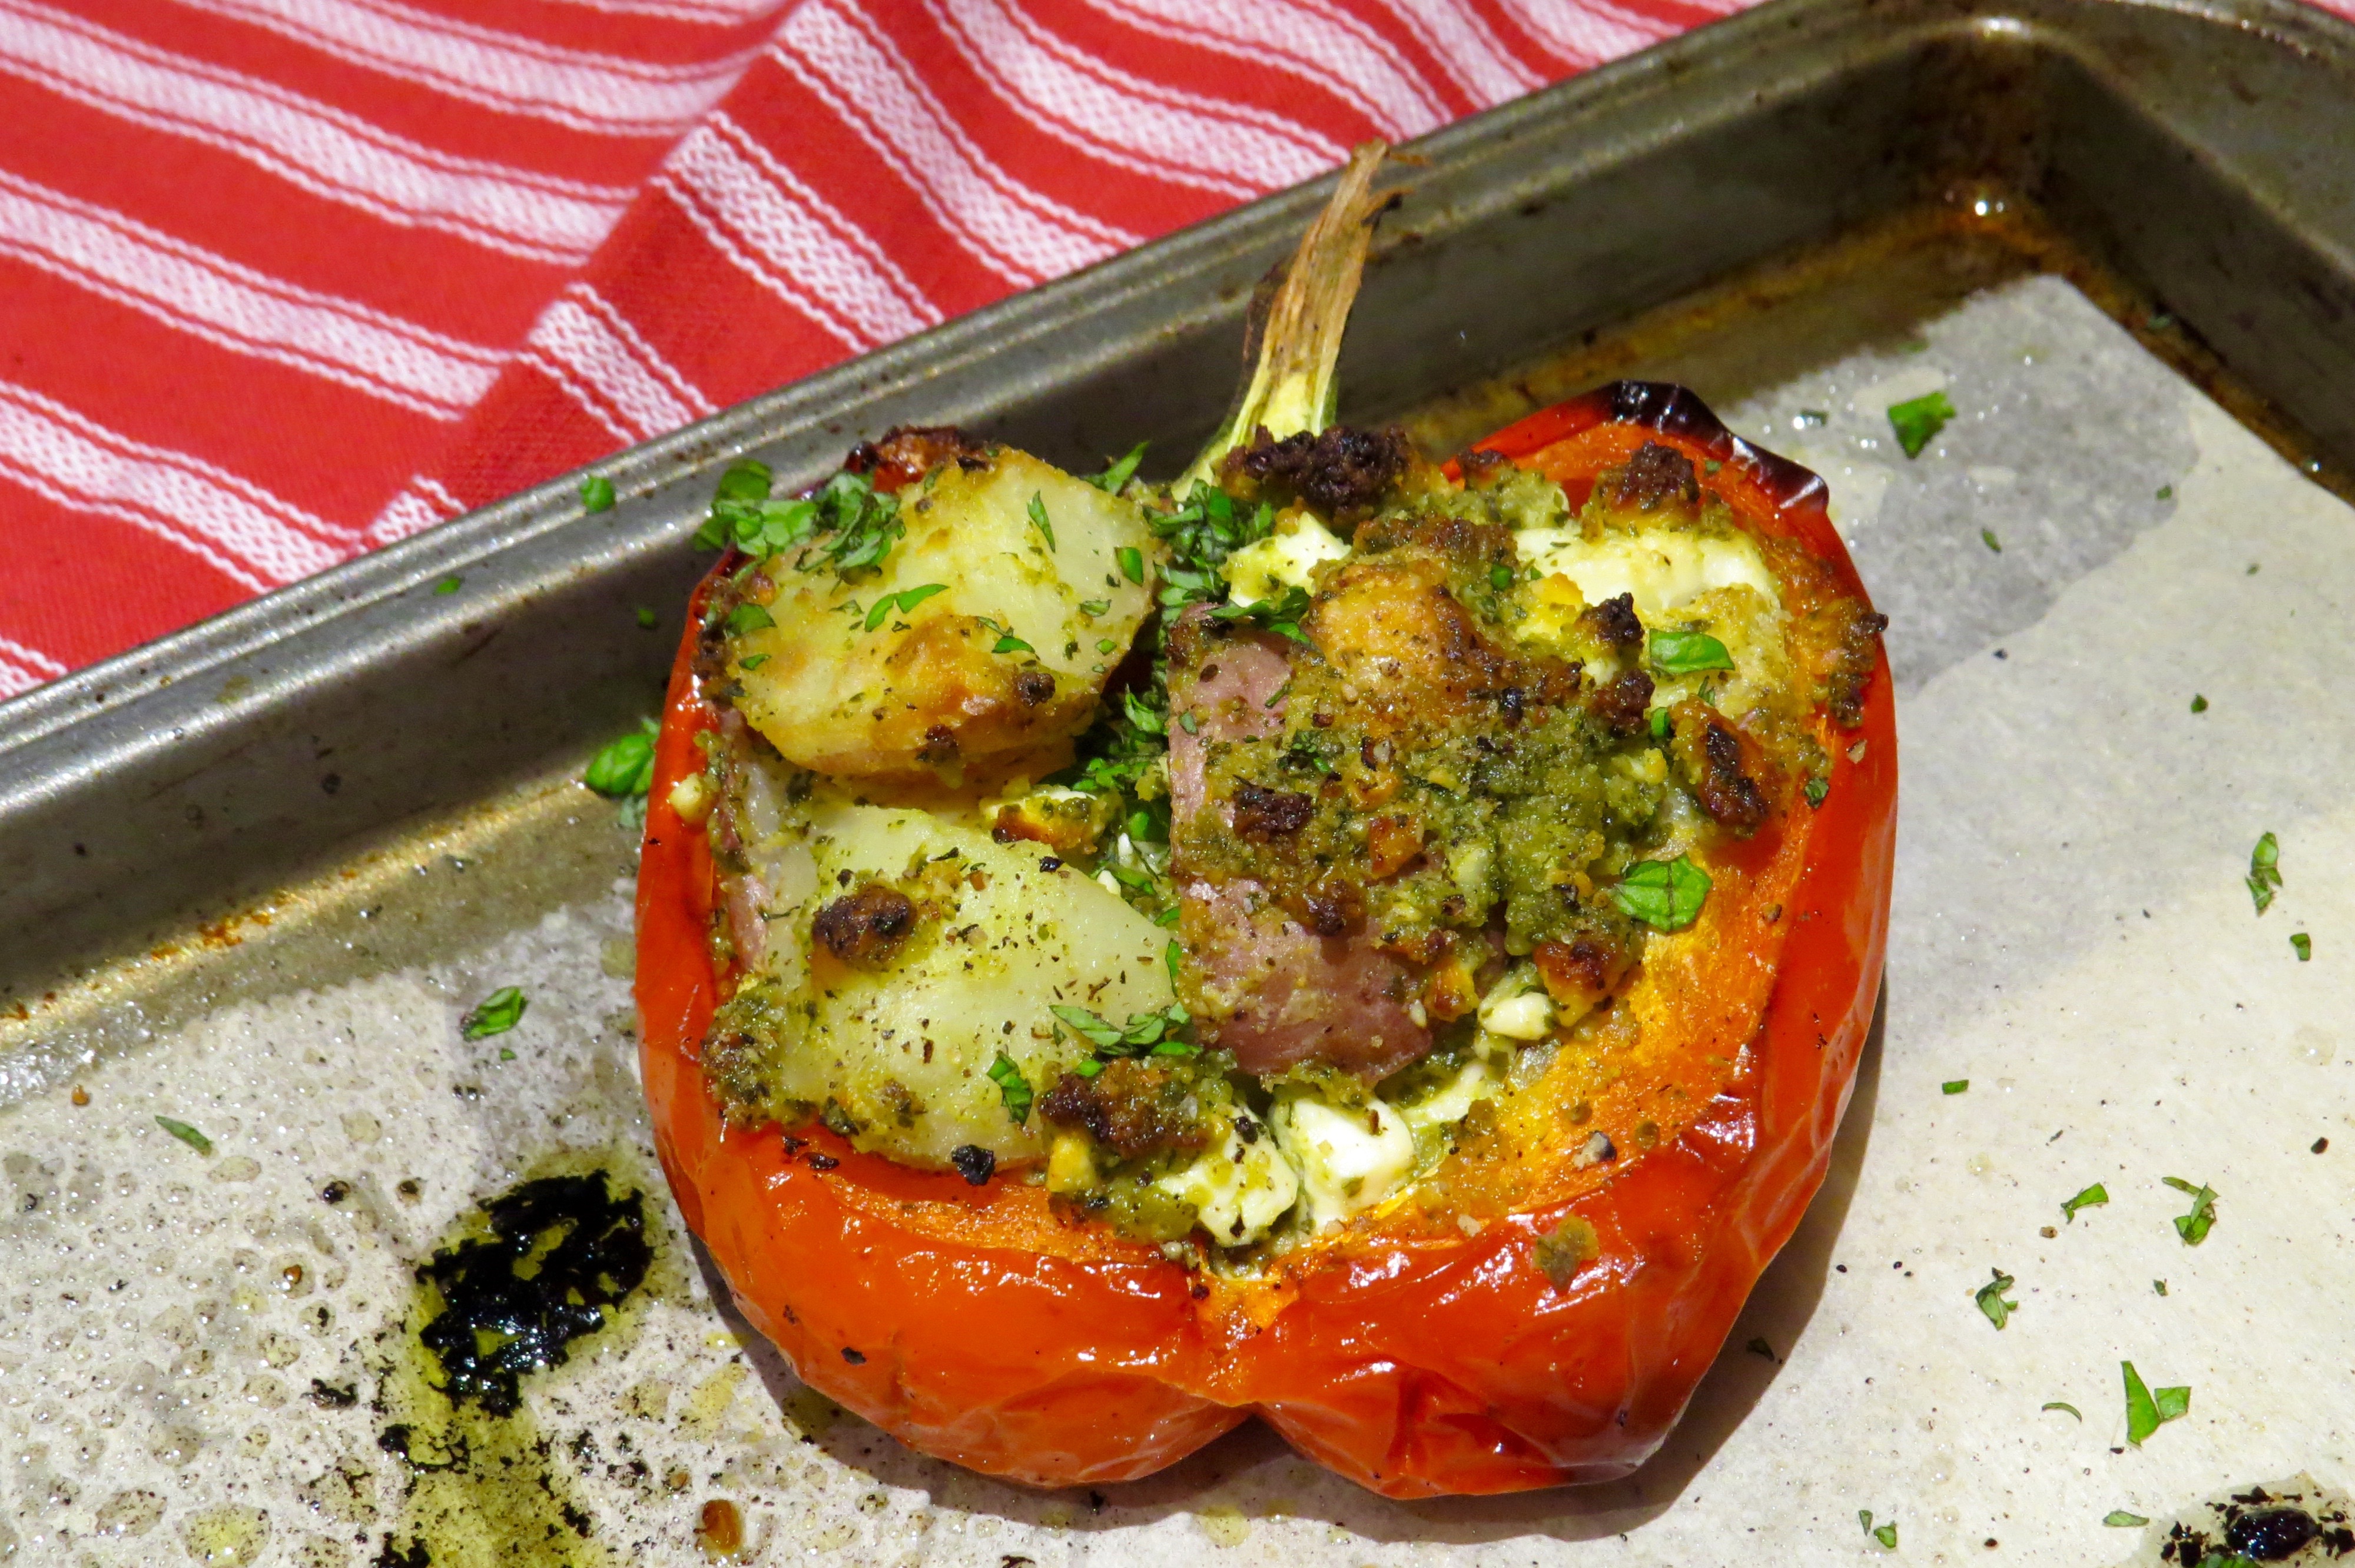 STUFFED PEPPERS WITH NEW POTATOES, FETA, AND PESTO